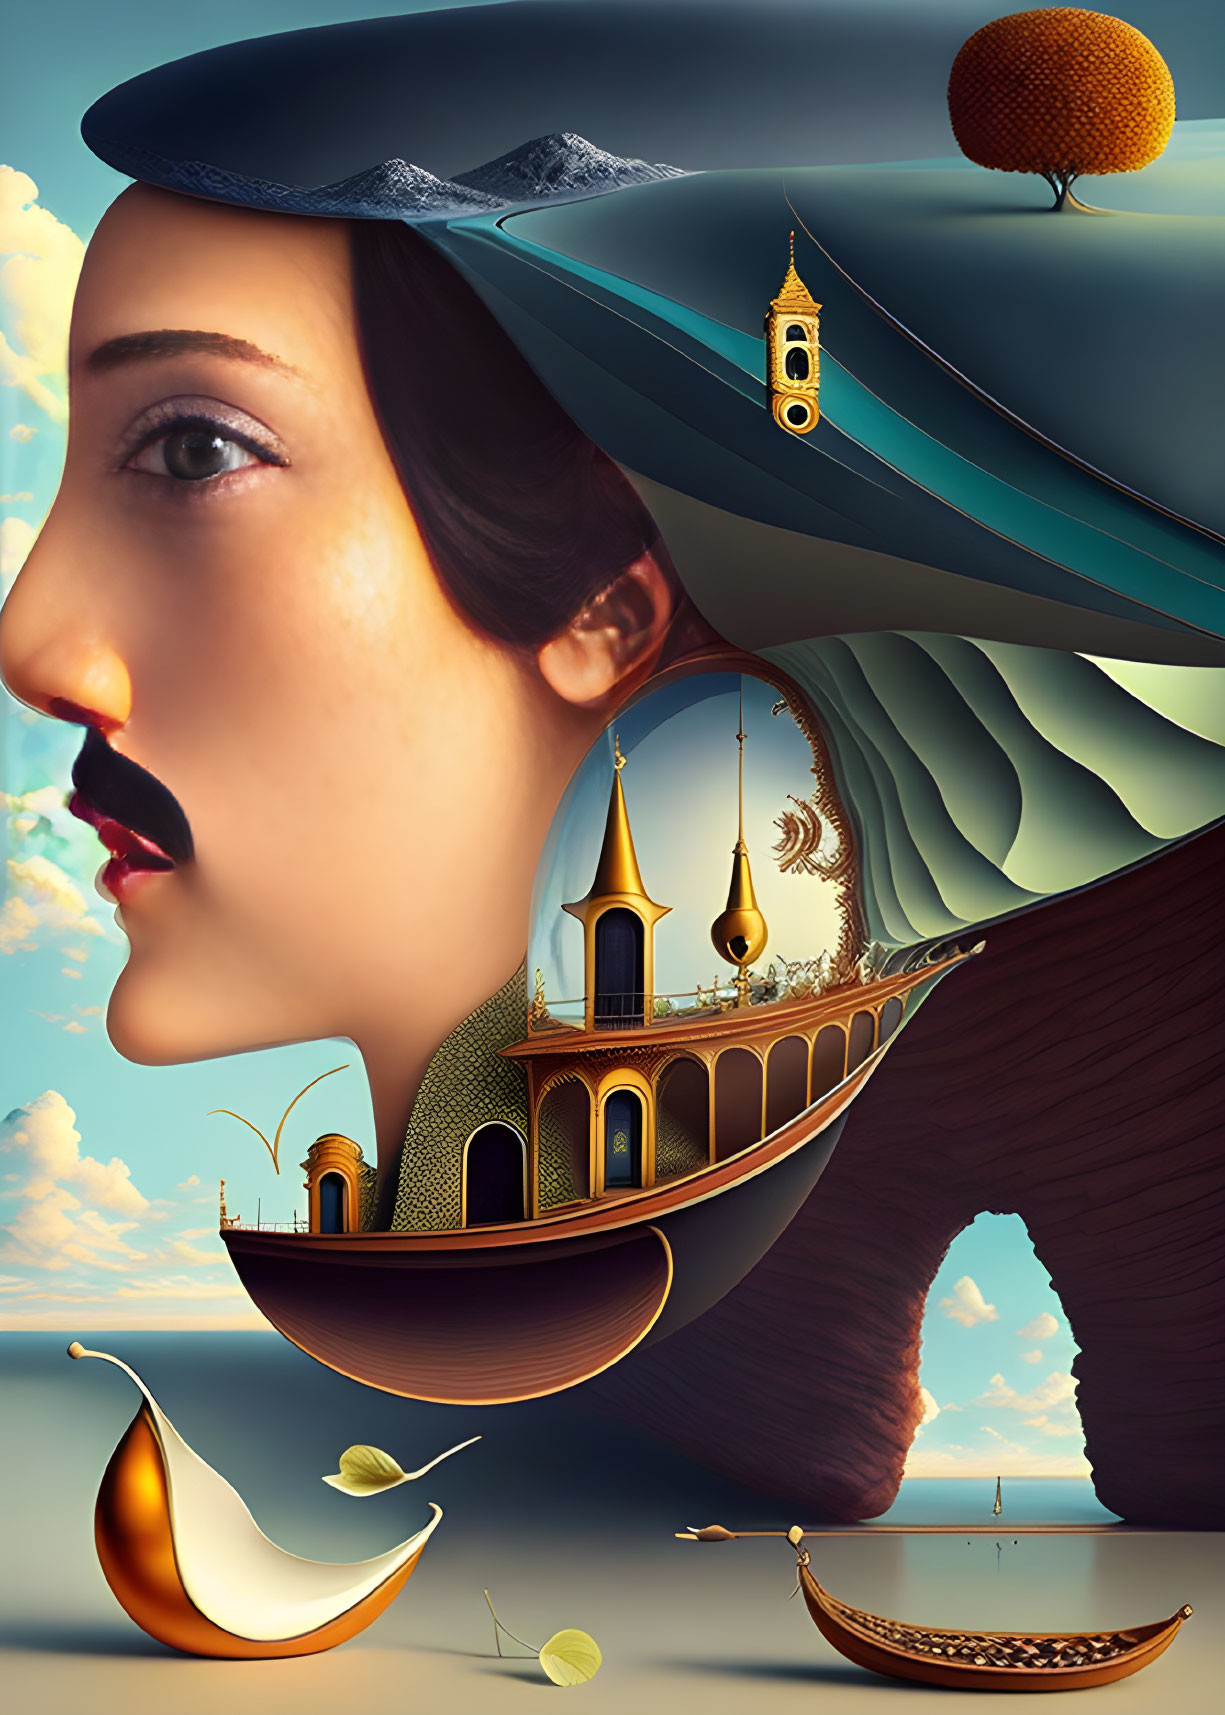 Surreal seascape with woman's profile and architectural elements